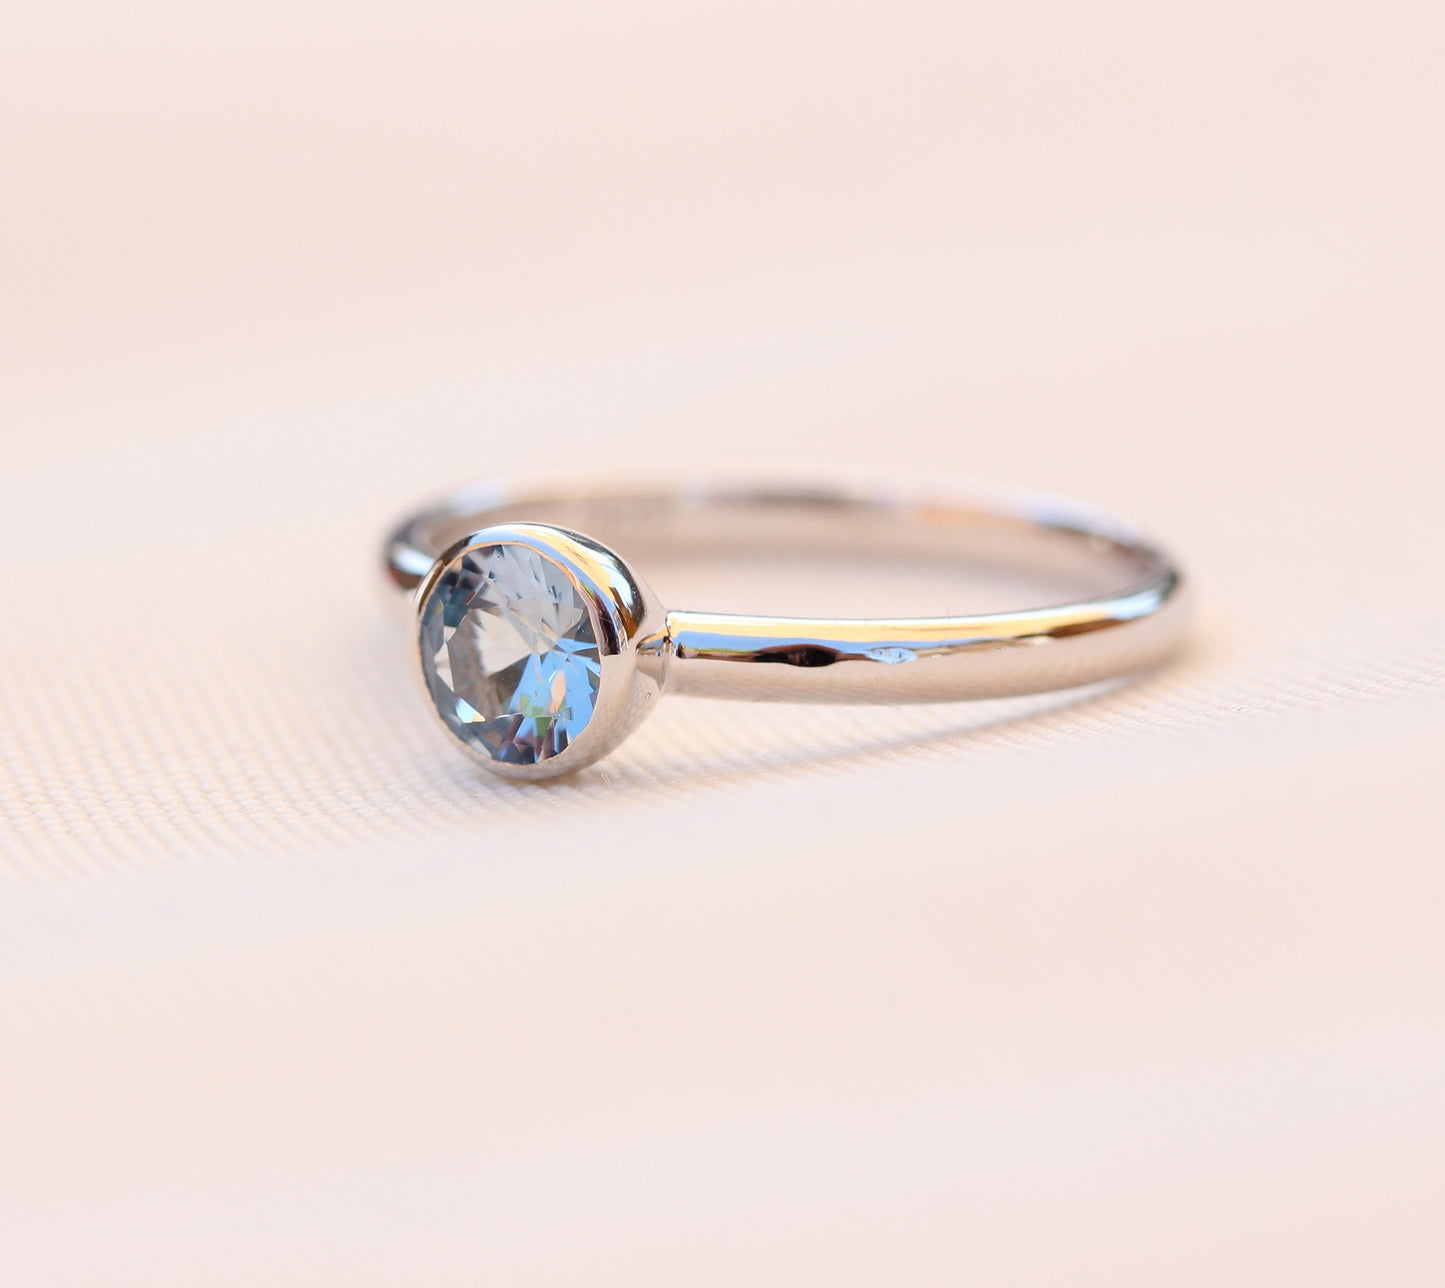 Natural Aquamarine bezel set solitaire ring - Available in white gold or sterling silver - handmade ring